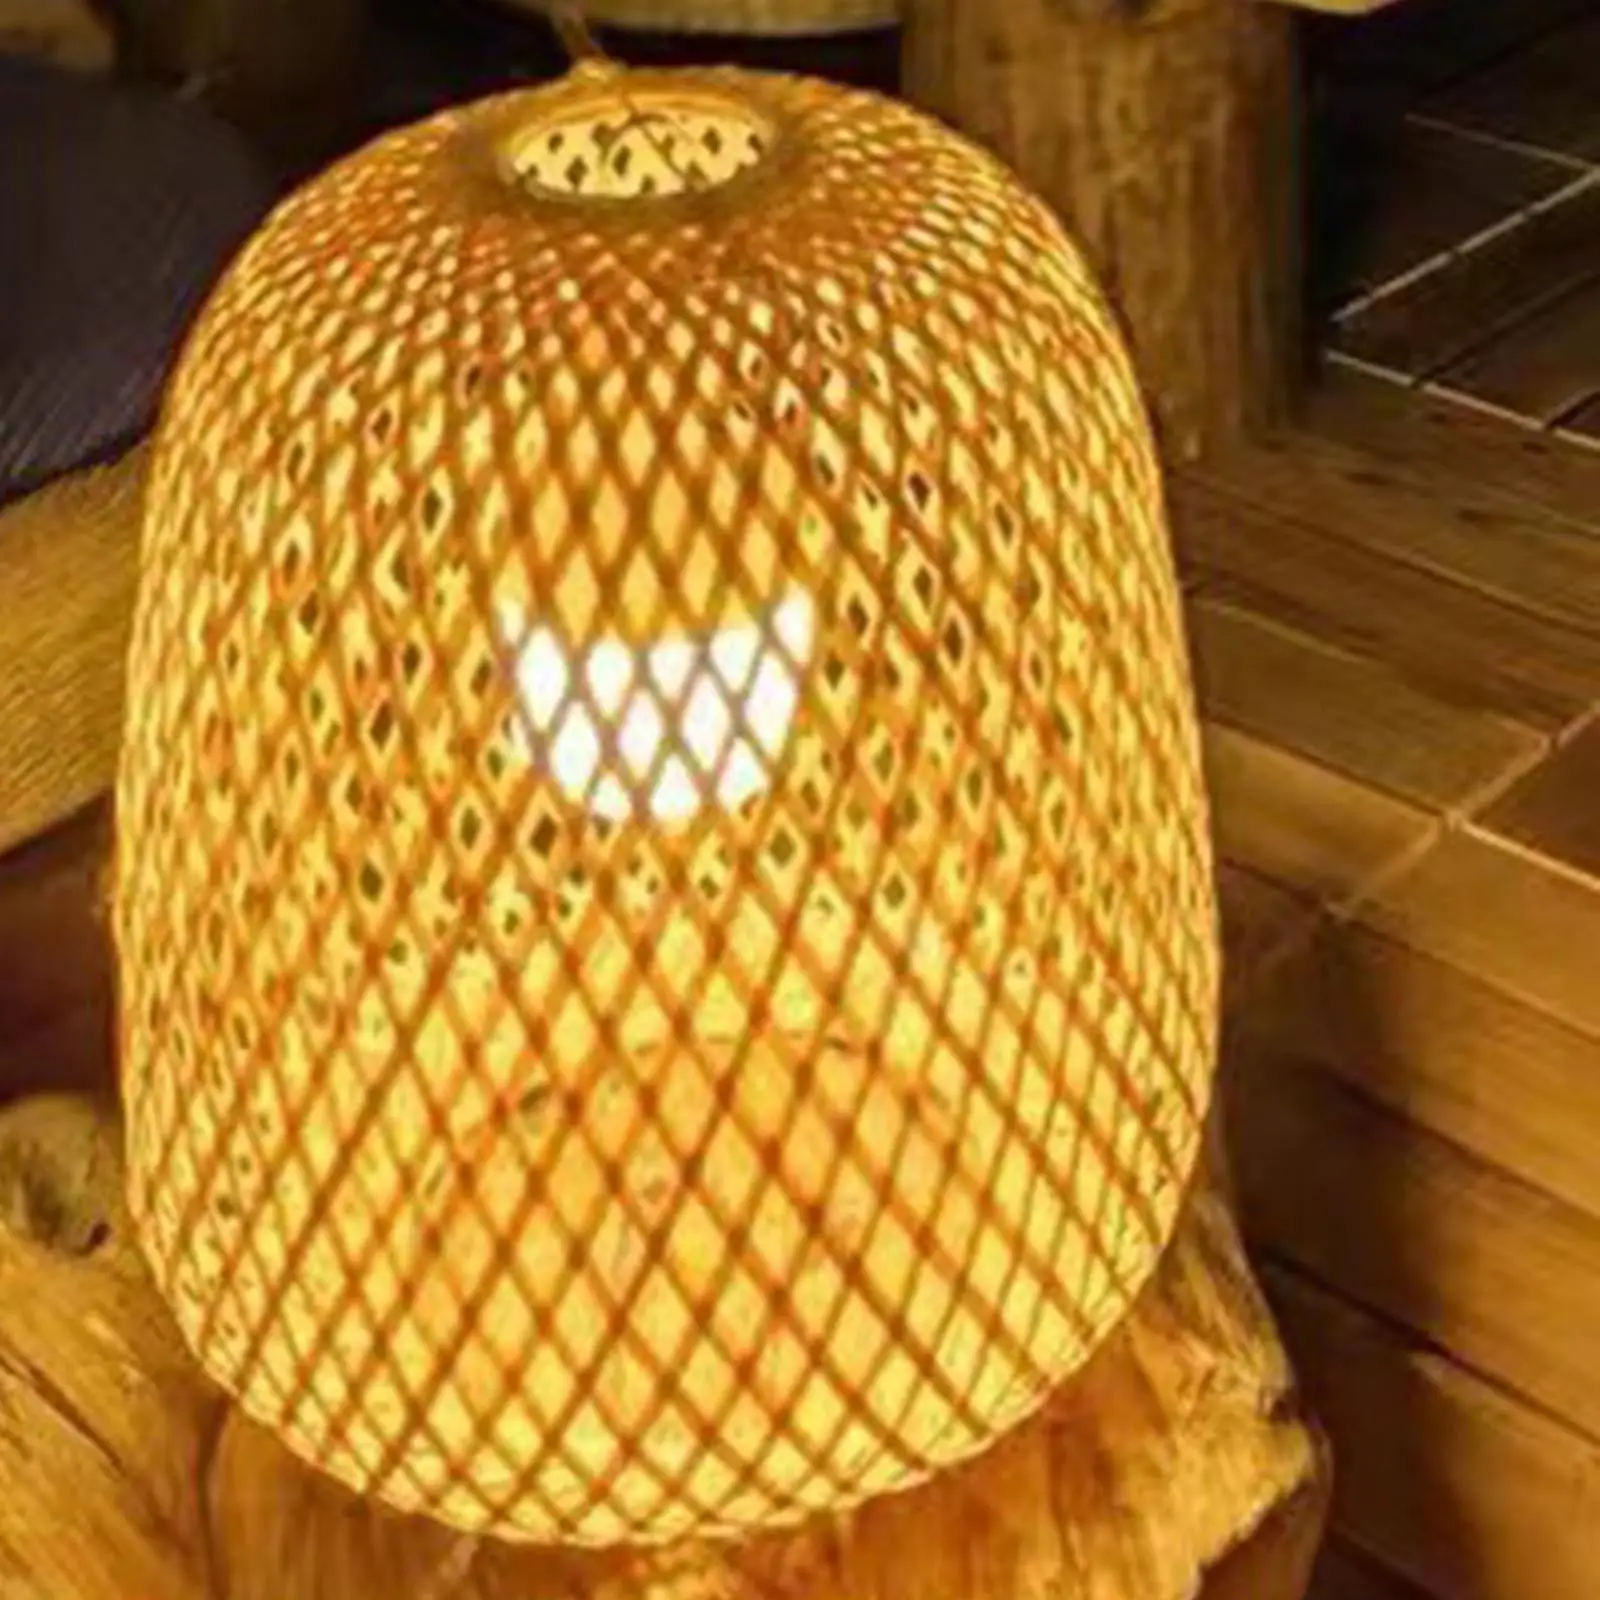 Bamboo Lampshade, Ceiling Light, Hanging Pendant Lamp, Cover, Lanterns